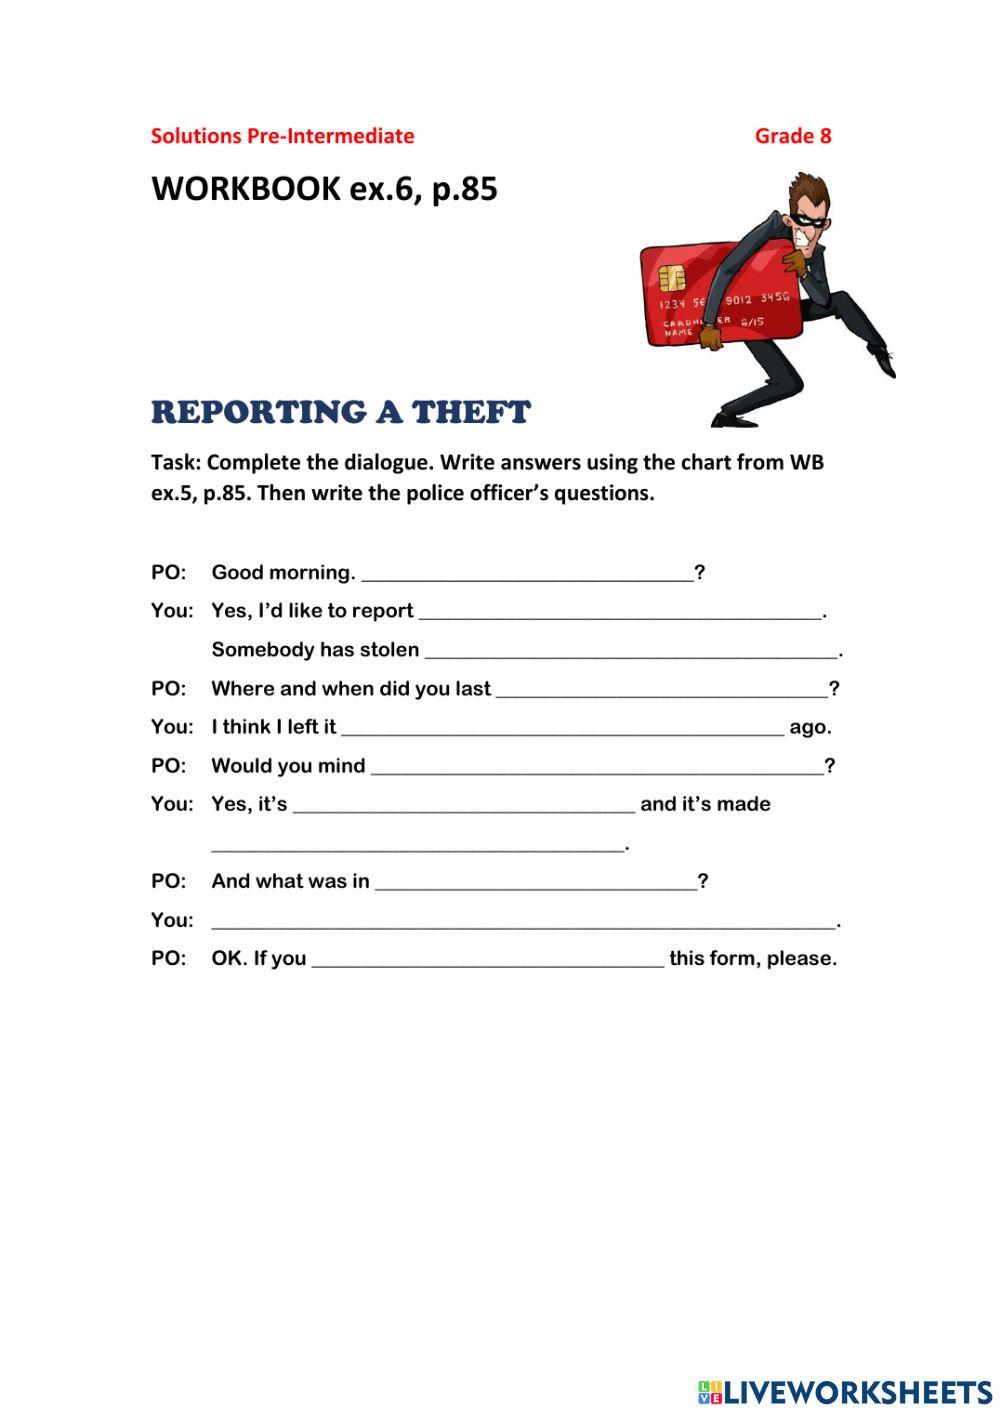 Reporting a theft